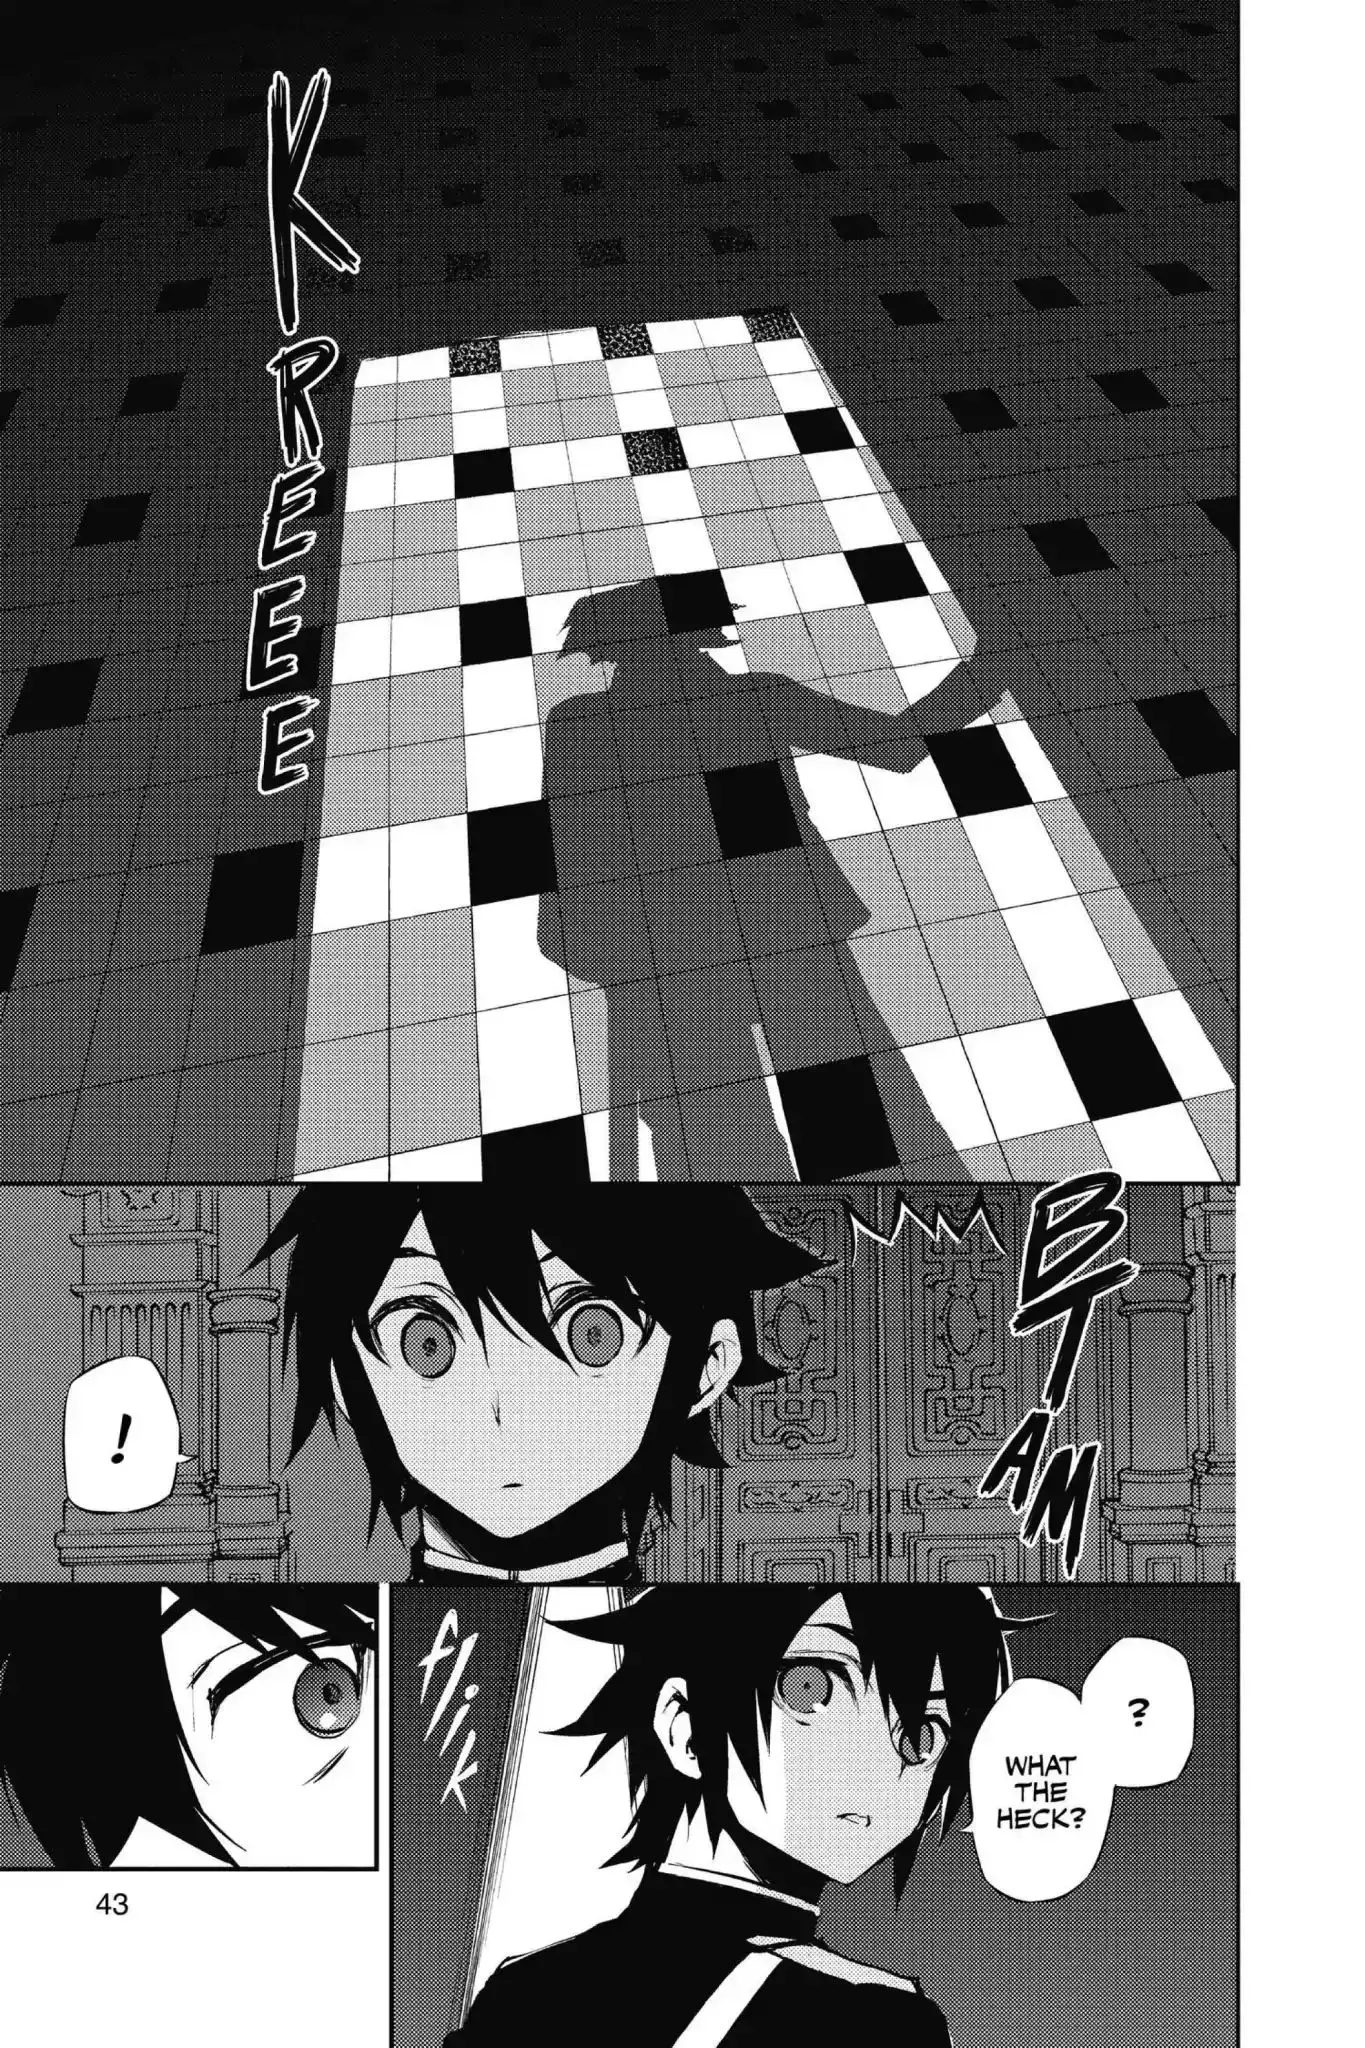 Seraph Of The End - 16 page 40-4871d079